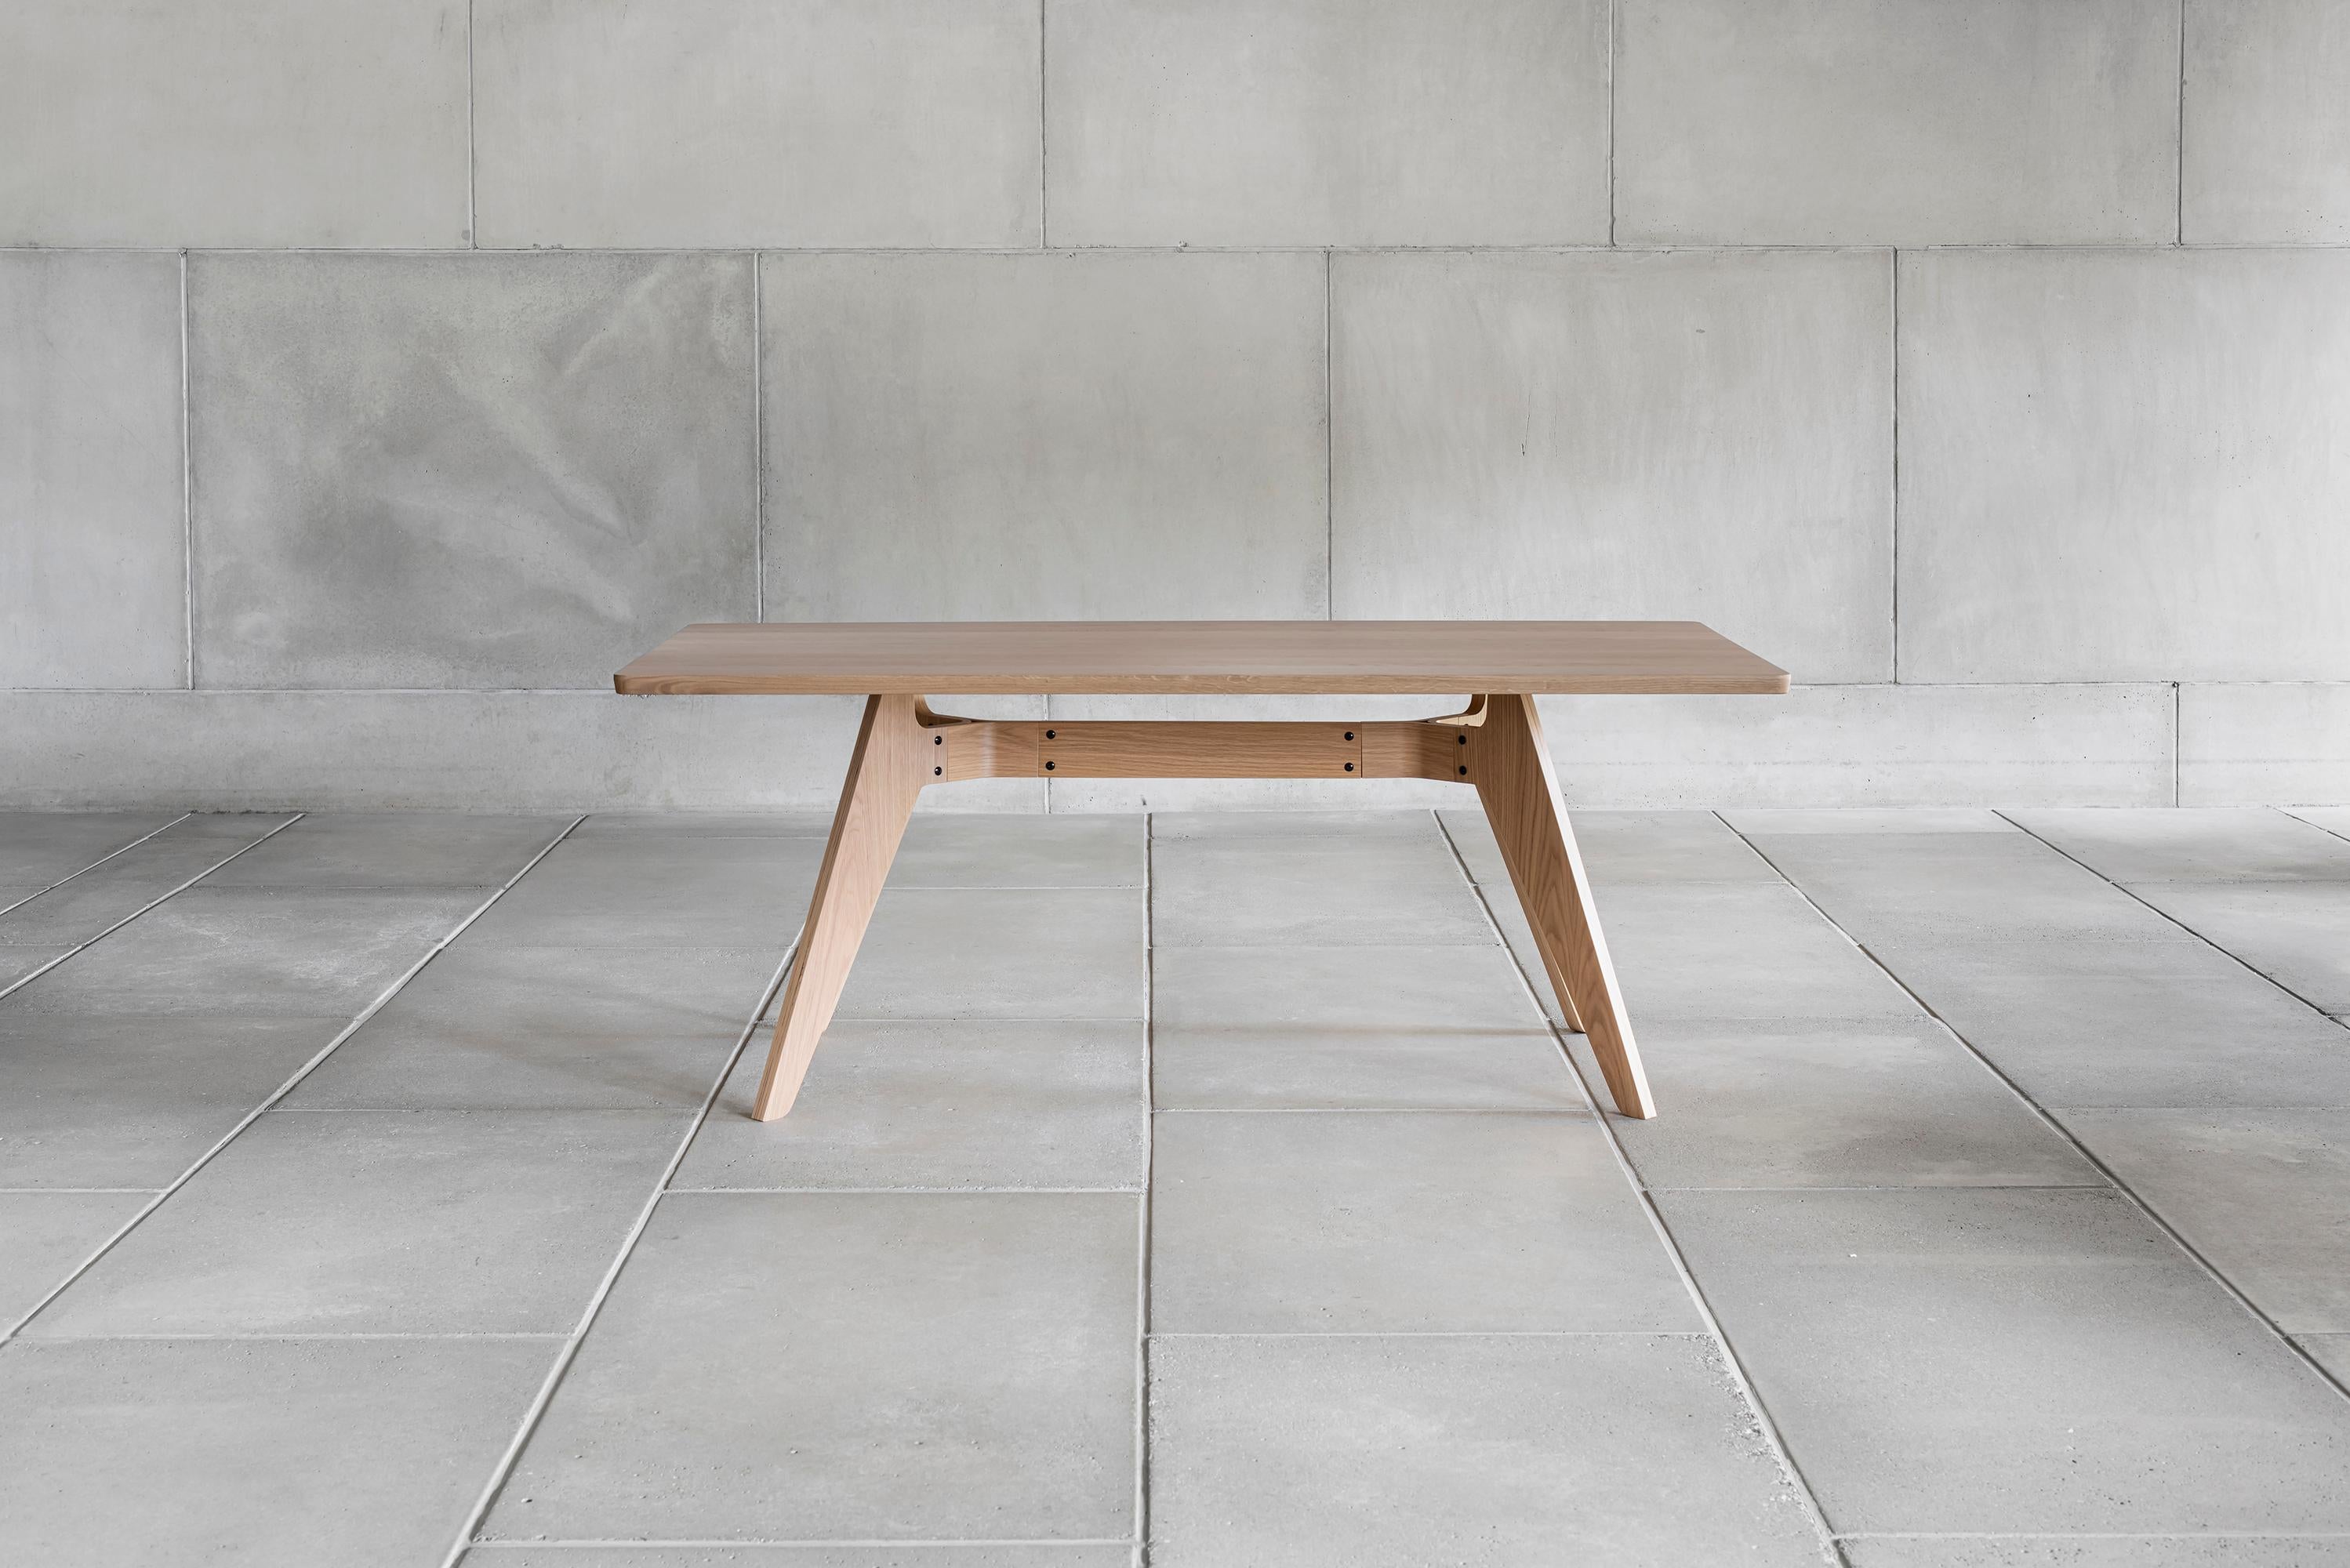 Lavitta dining table 180 cm designed by Timo Mikkonen & Antti Rouhunkoski
Collection Lavitta 2016 by Poiat 

Model shown on picture
Dimensions : H. 72 cm x 180 cm x 90 cm
Color : Oak 

The Lavitta Collection draws upon the influences of